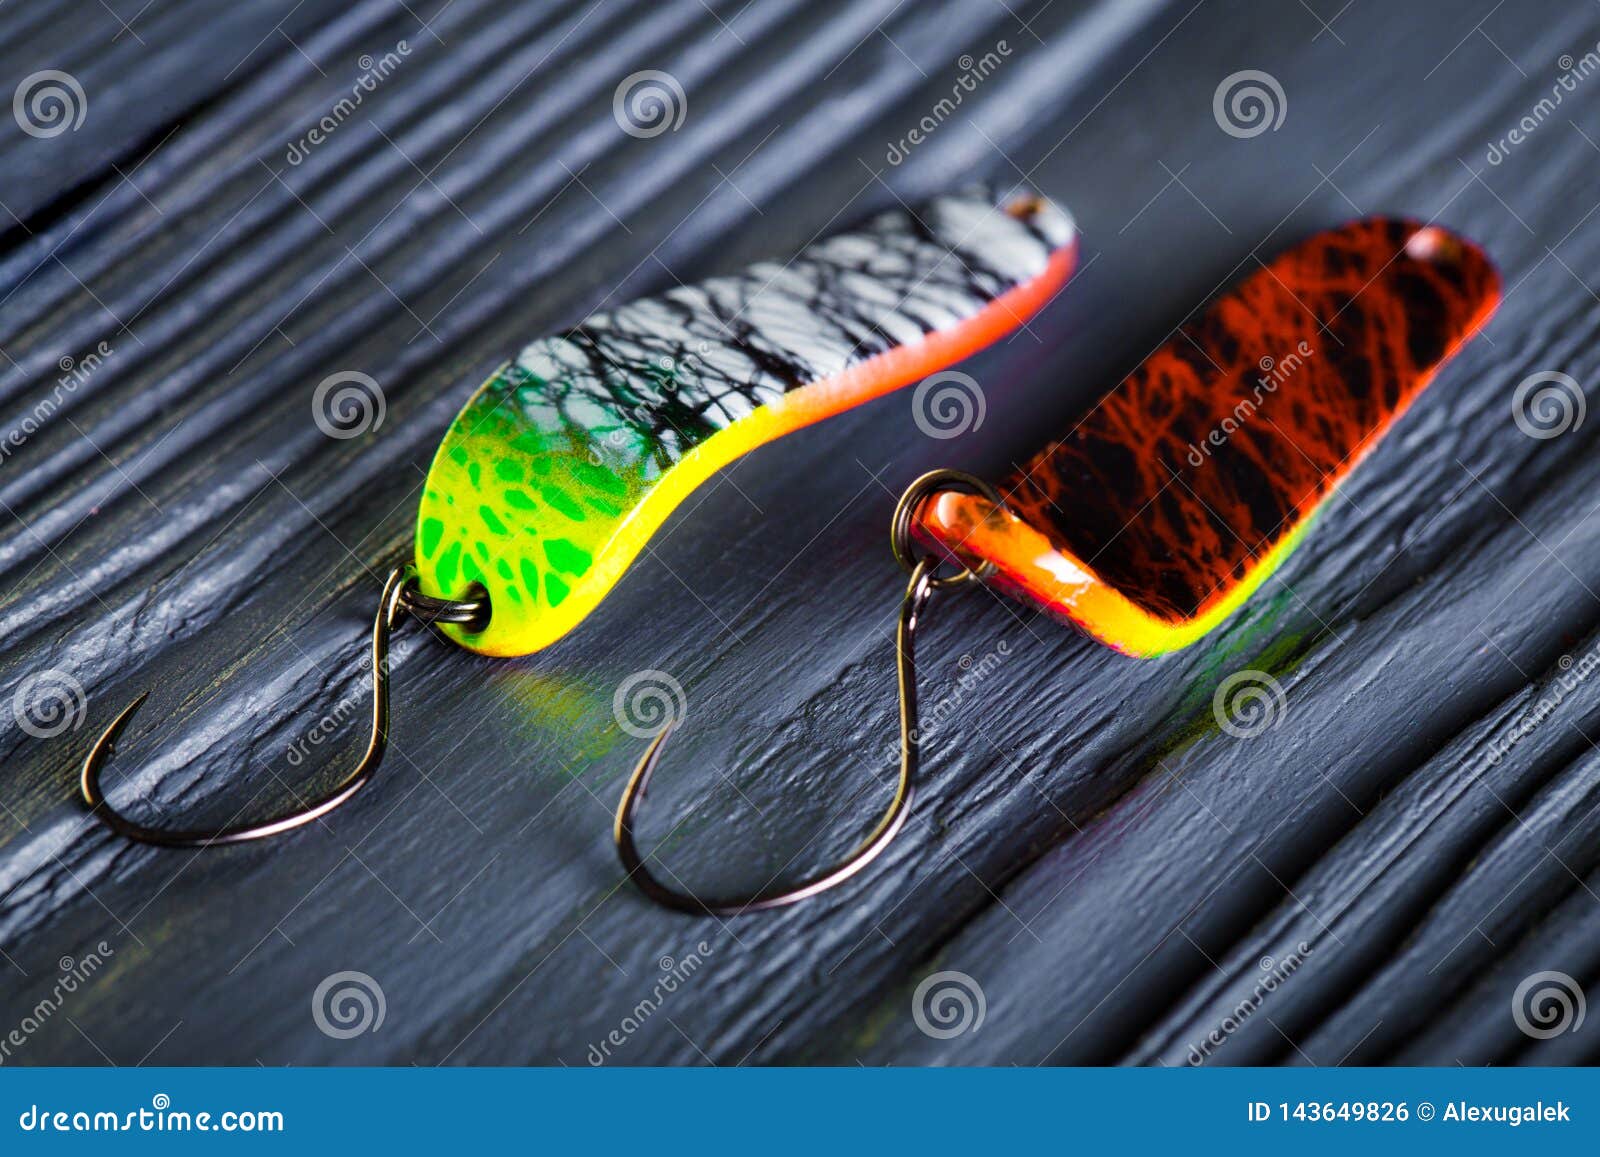 Asp fish lures stock photo. Image of yellow, spinning - 143649826